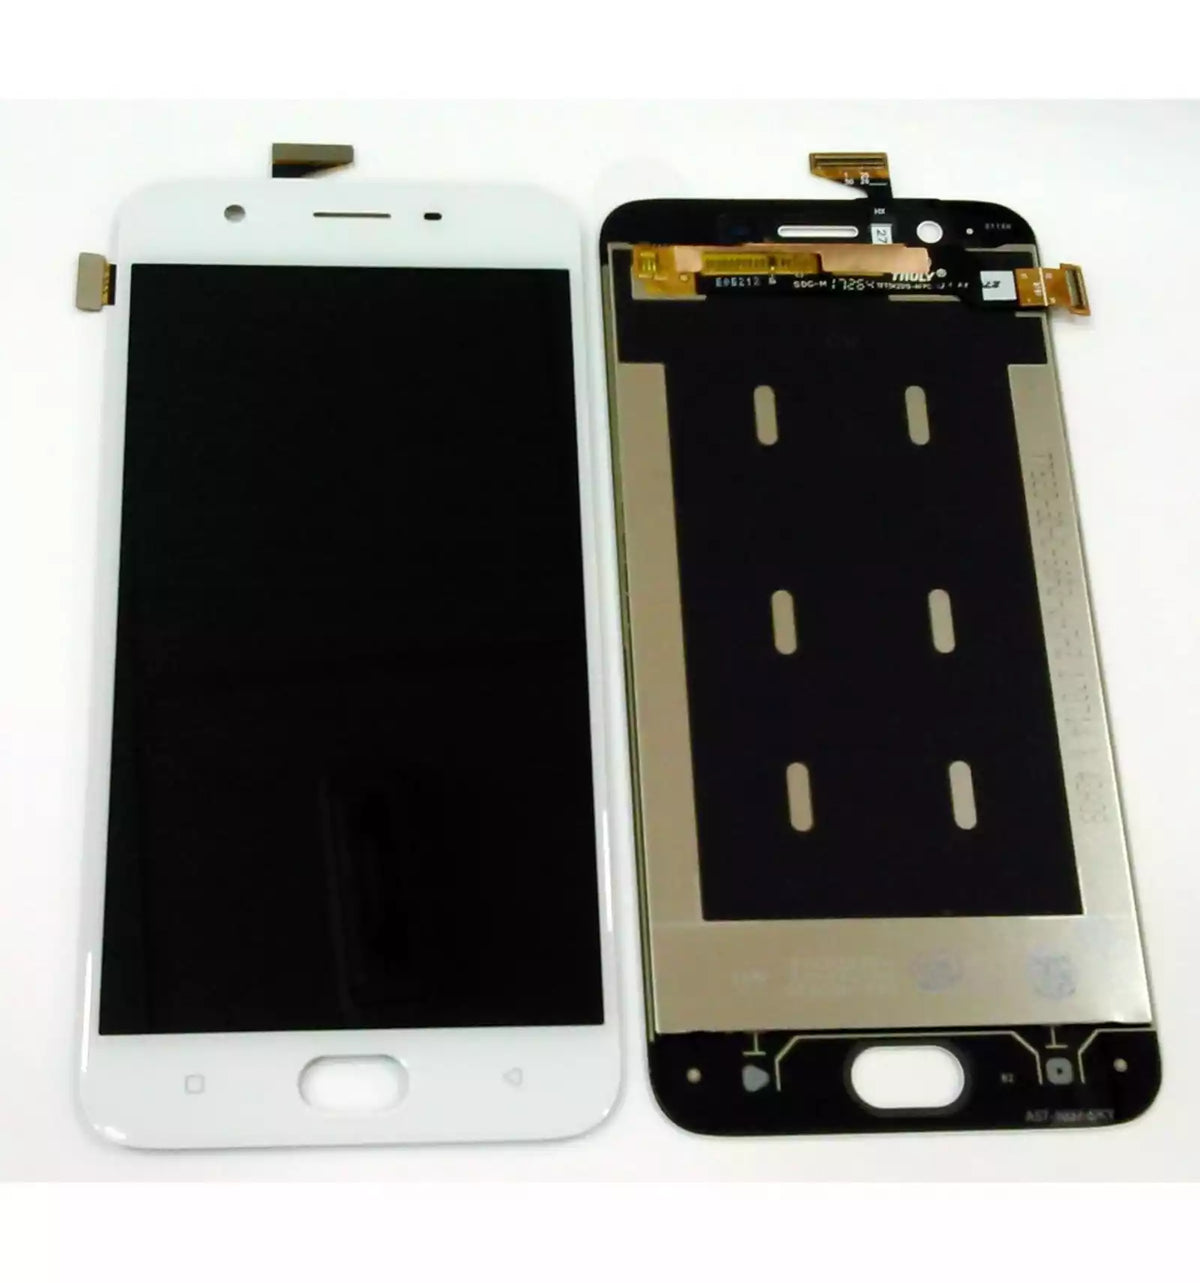 OPPO A57 (2016) / OPPO F3 Lite Compatible LCD Touch Digitizer Screen